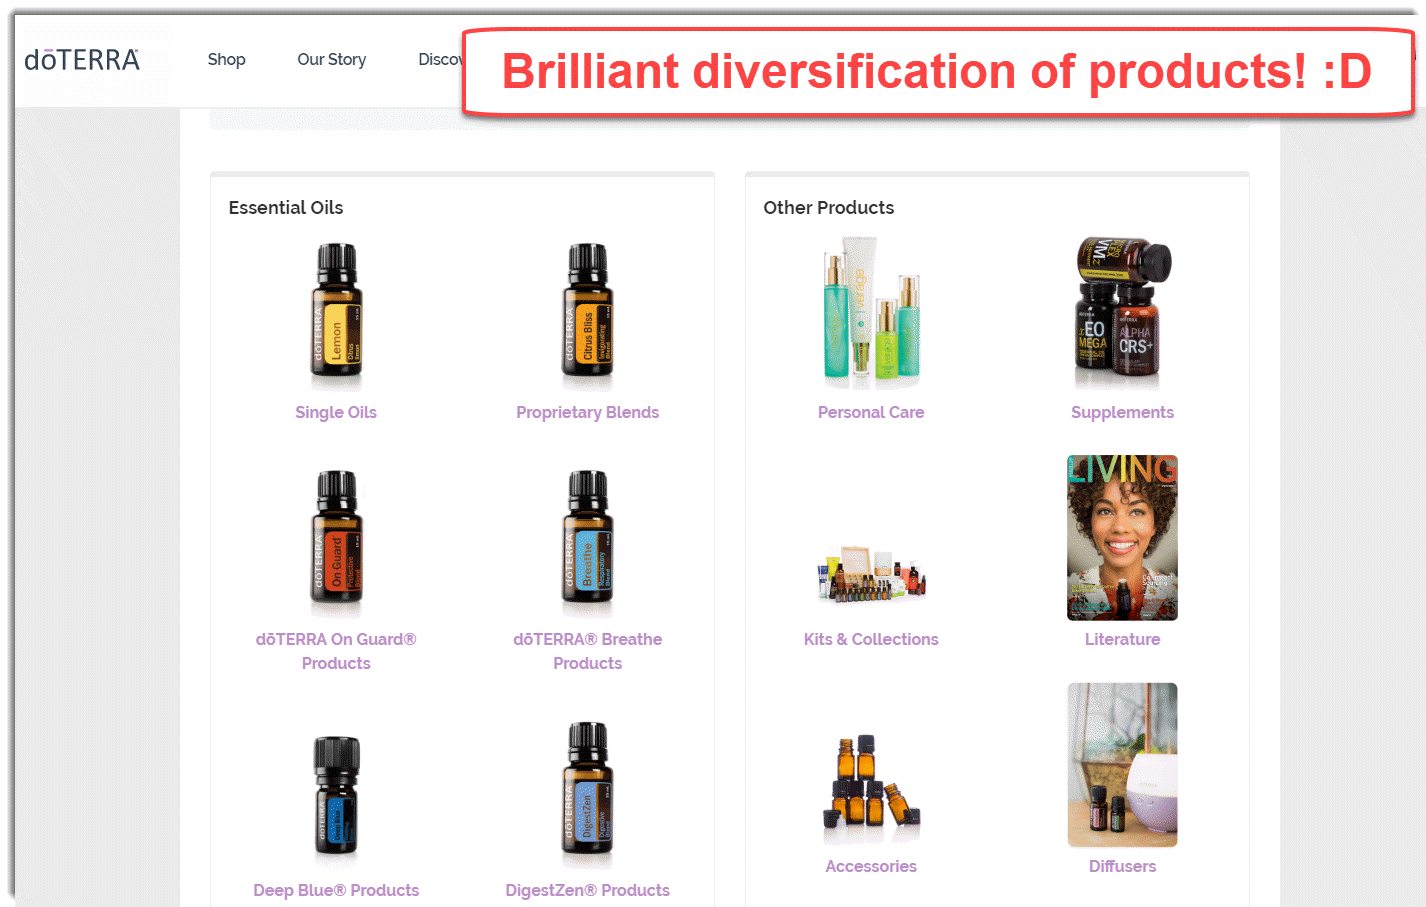 doterra products